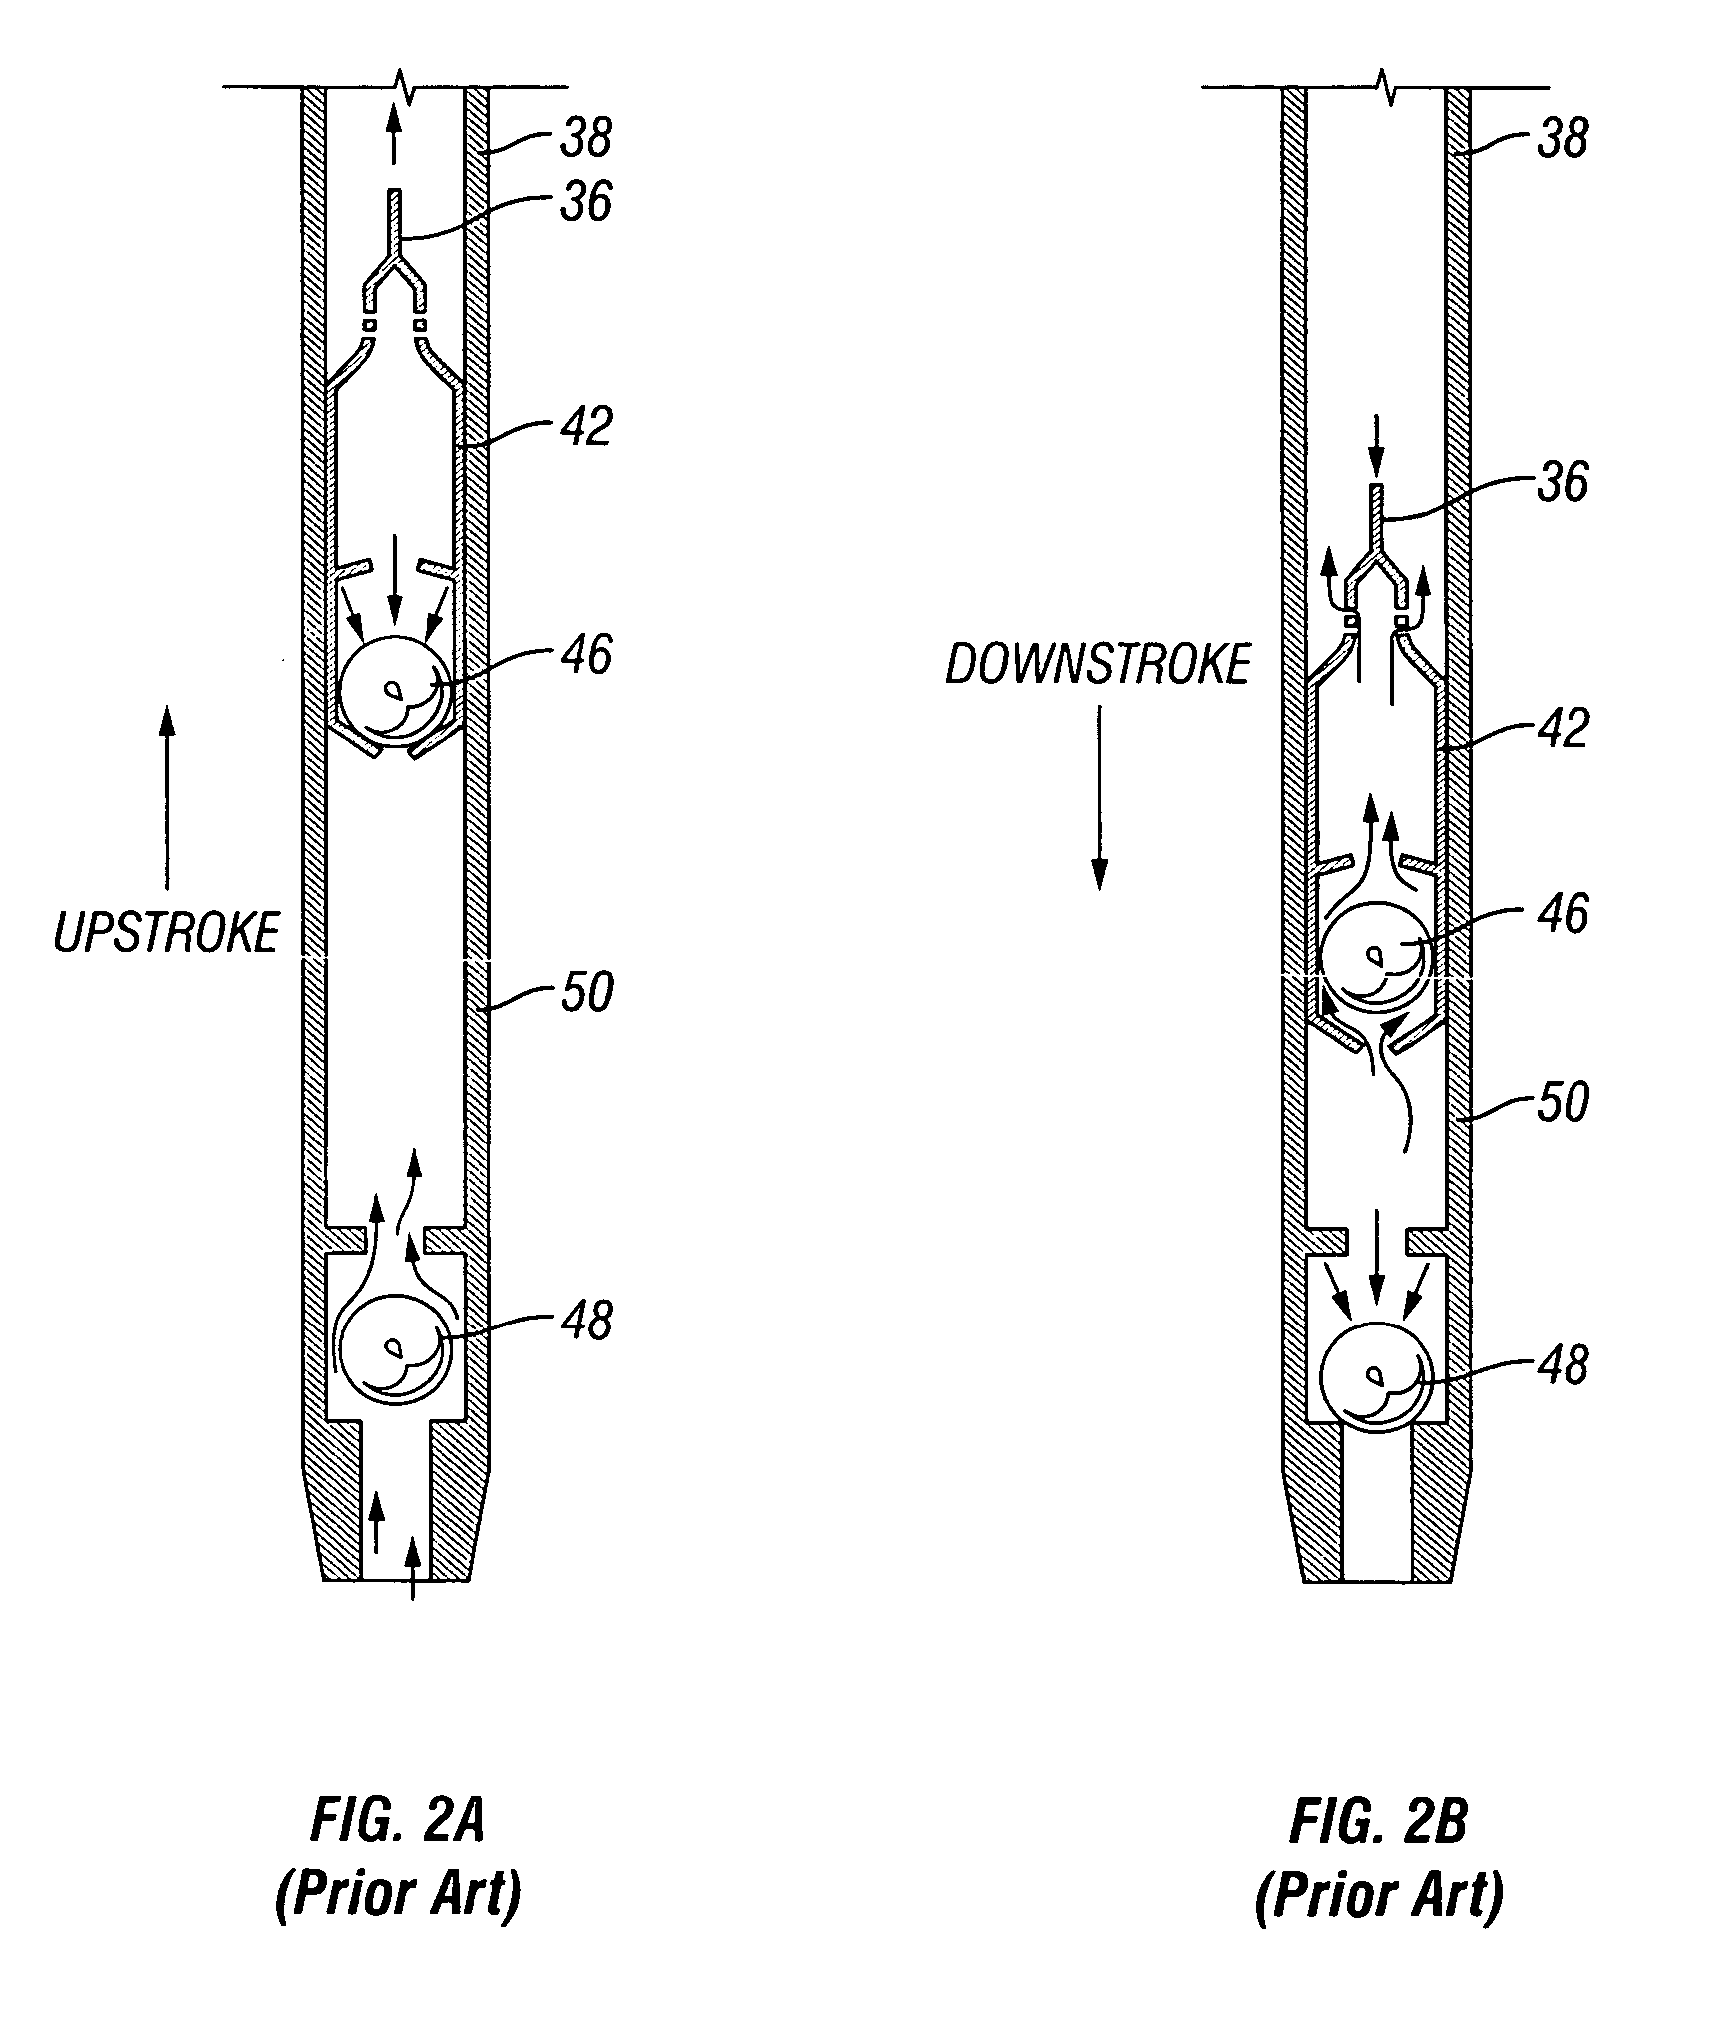 Inferred production rates of a rod pumped well from surface and pump card information